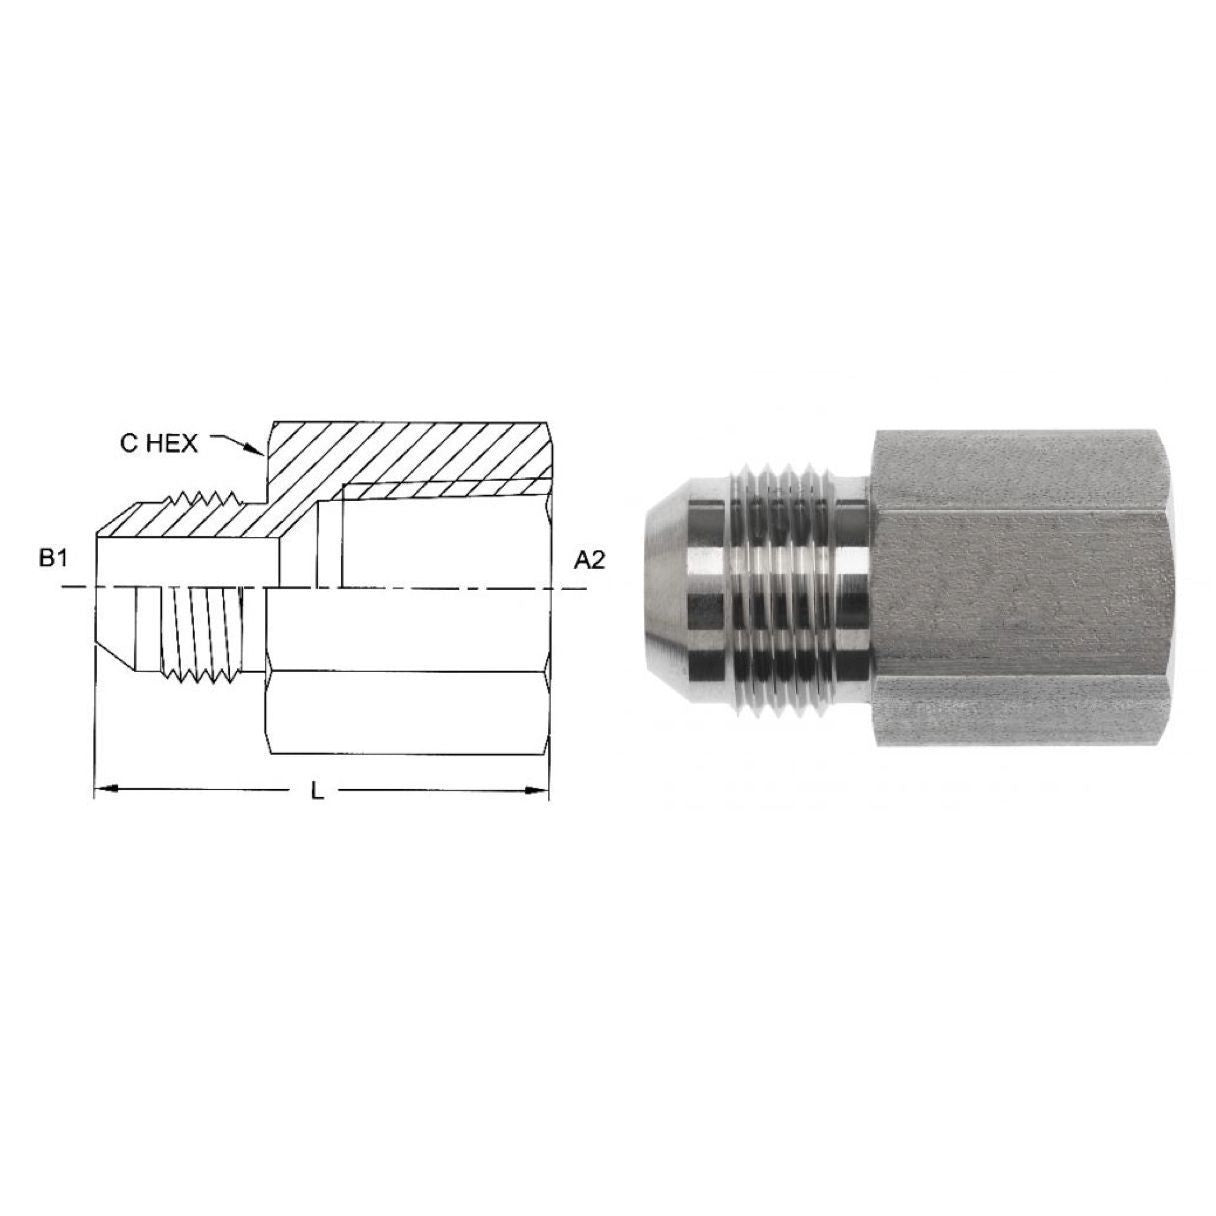 2405-06-12 : OneHydraulics Adapter, Straight, 0.375 (3/8") Male NPT x 0.75 (3/4") Female, Steel, 4000psi